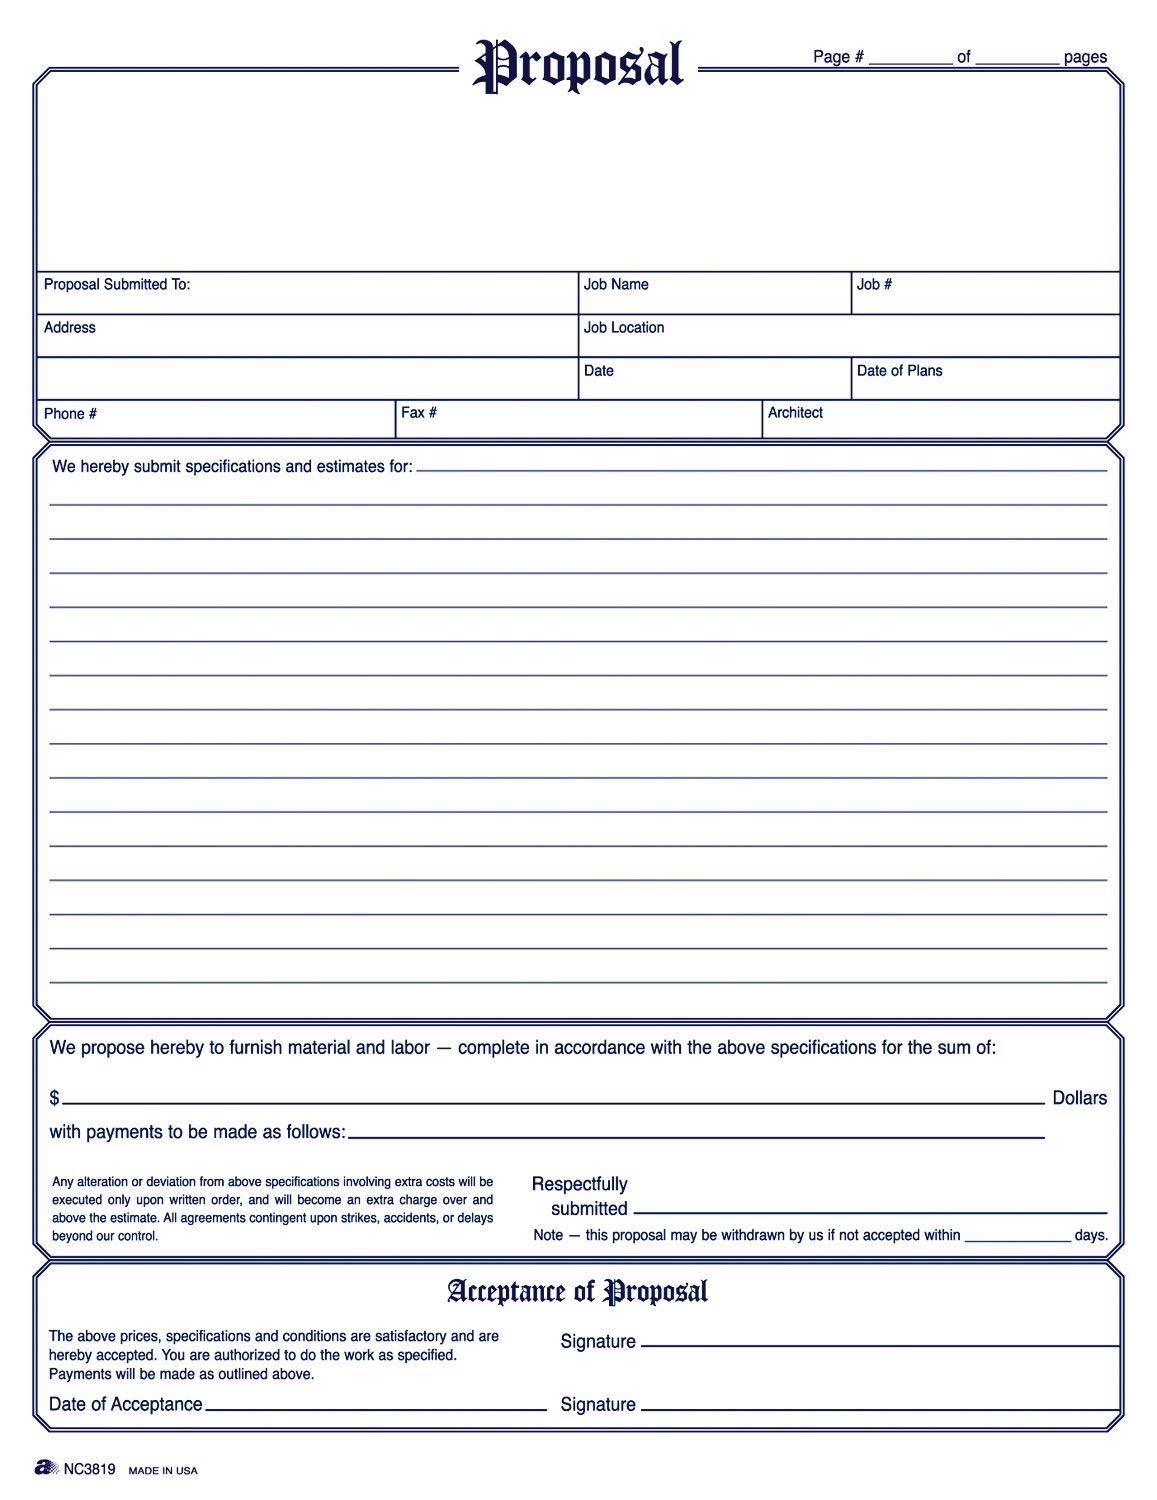 Free Contractor Proposal Form | charlotte clergy coalition